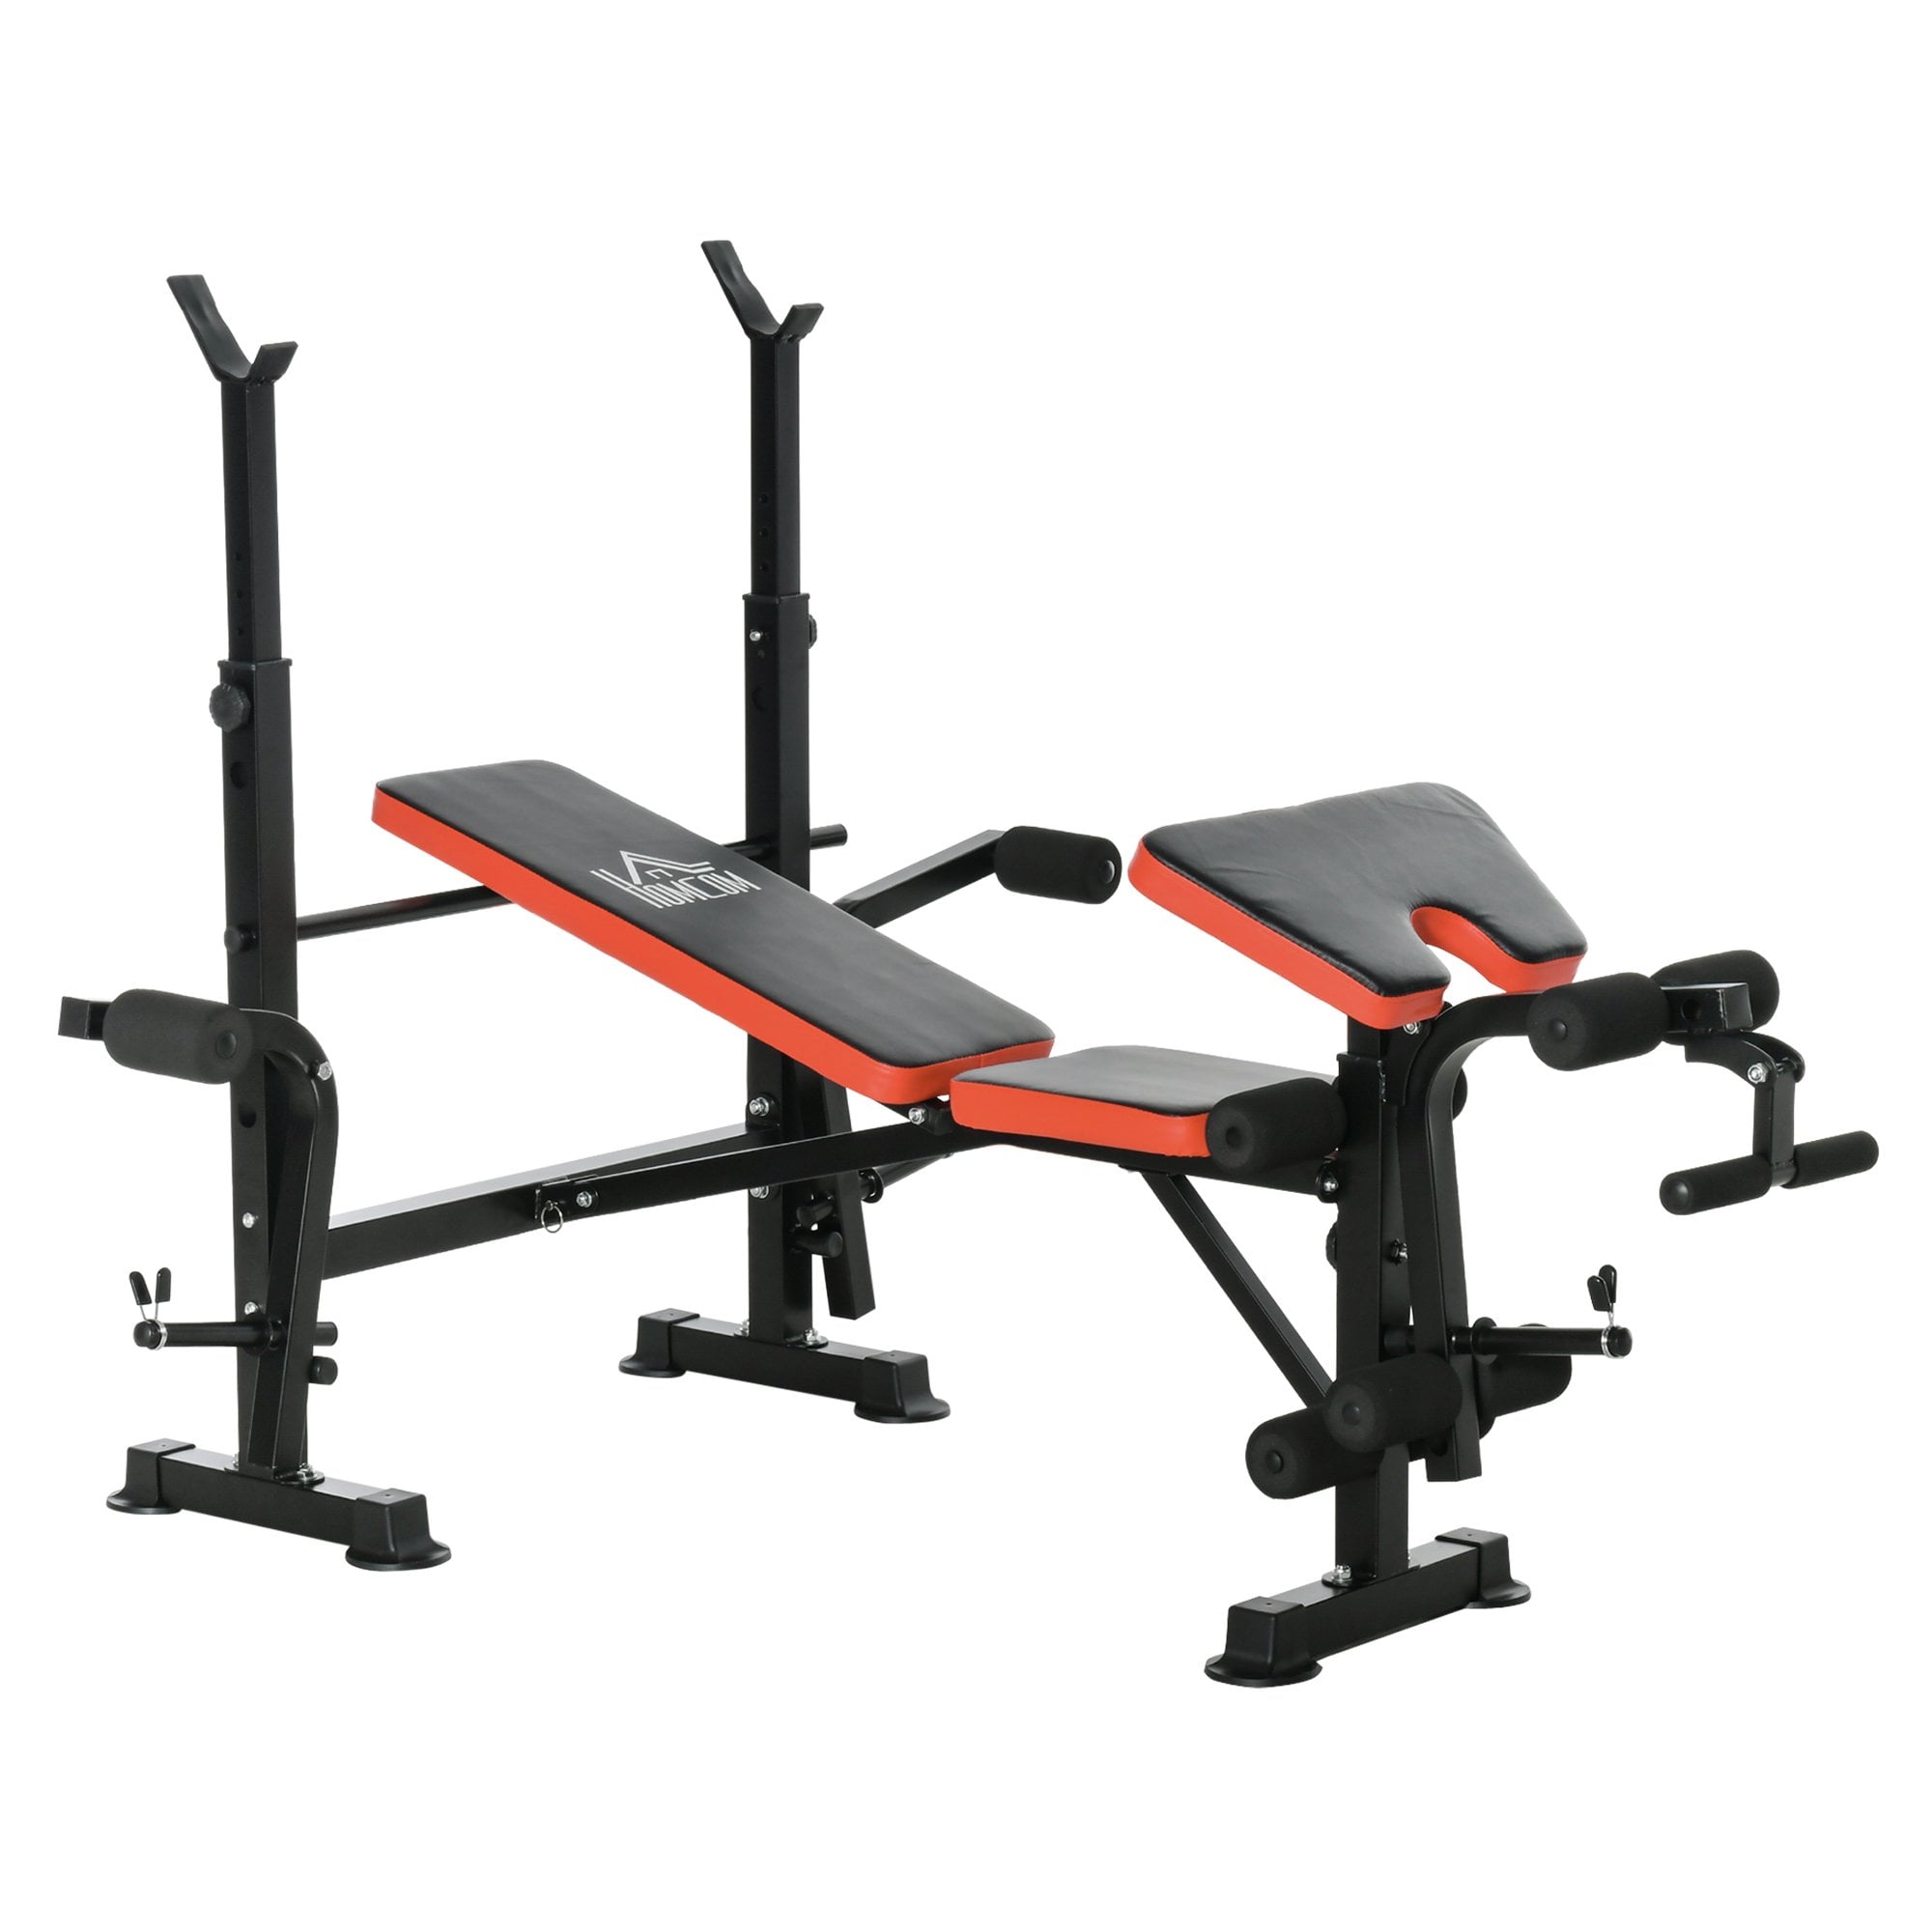 Steel Multi-Function Adjustable Weight Training Bench Gym Fitness Lifting Bench Workout Station - MAXFIT  | TJ Hughes